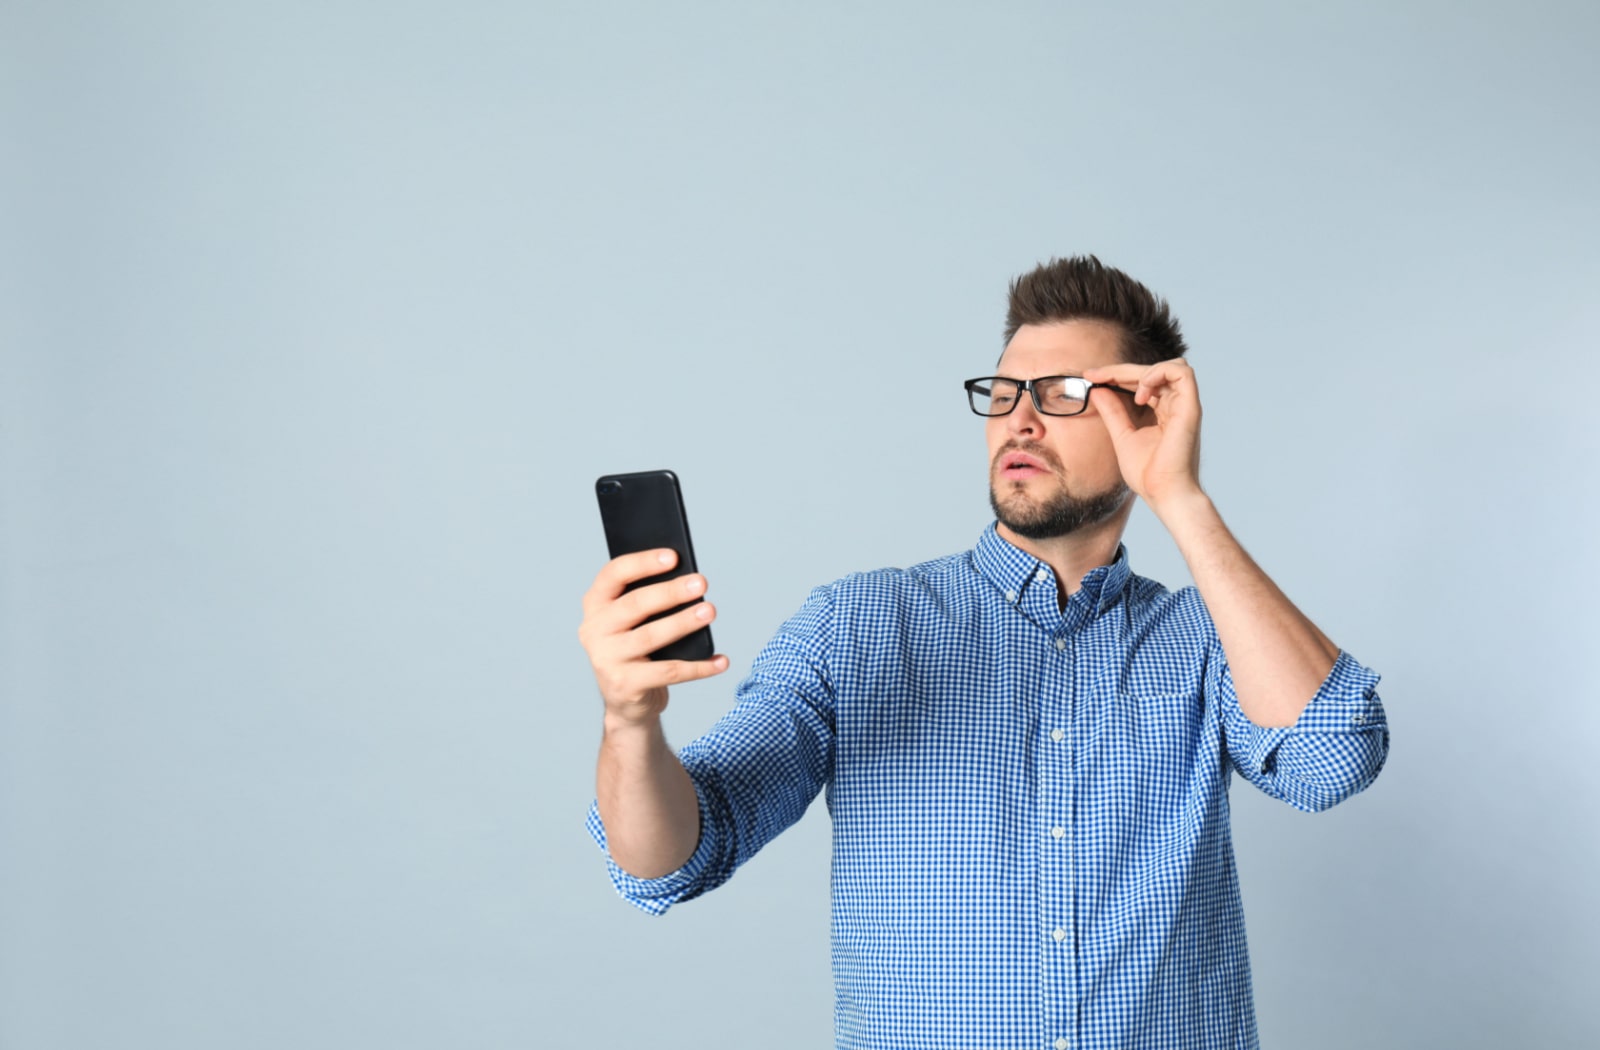 A man with hyperopia struggles to see his phone screen up close, so he is holding his smartphone farther away from his face